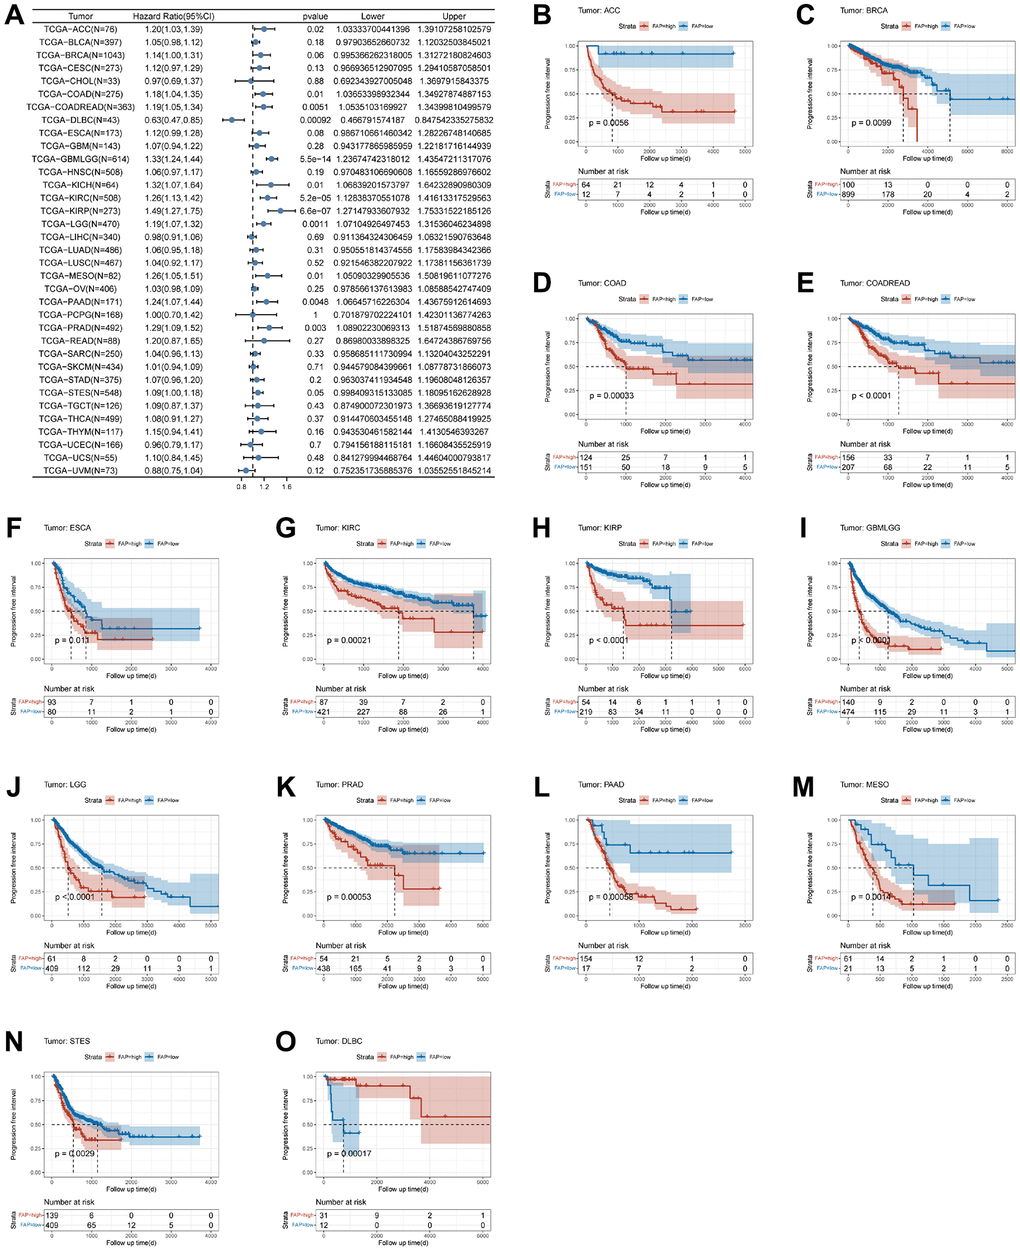 Association between FAP expression and progression-free interval (PFI). (A) Forest plot of association of FAP expression and PFI in pan-cancer. (B–O) Kaplan-Meier analysis of the association between FAP expression and PFI.